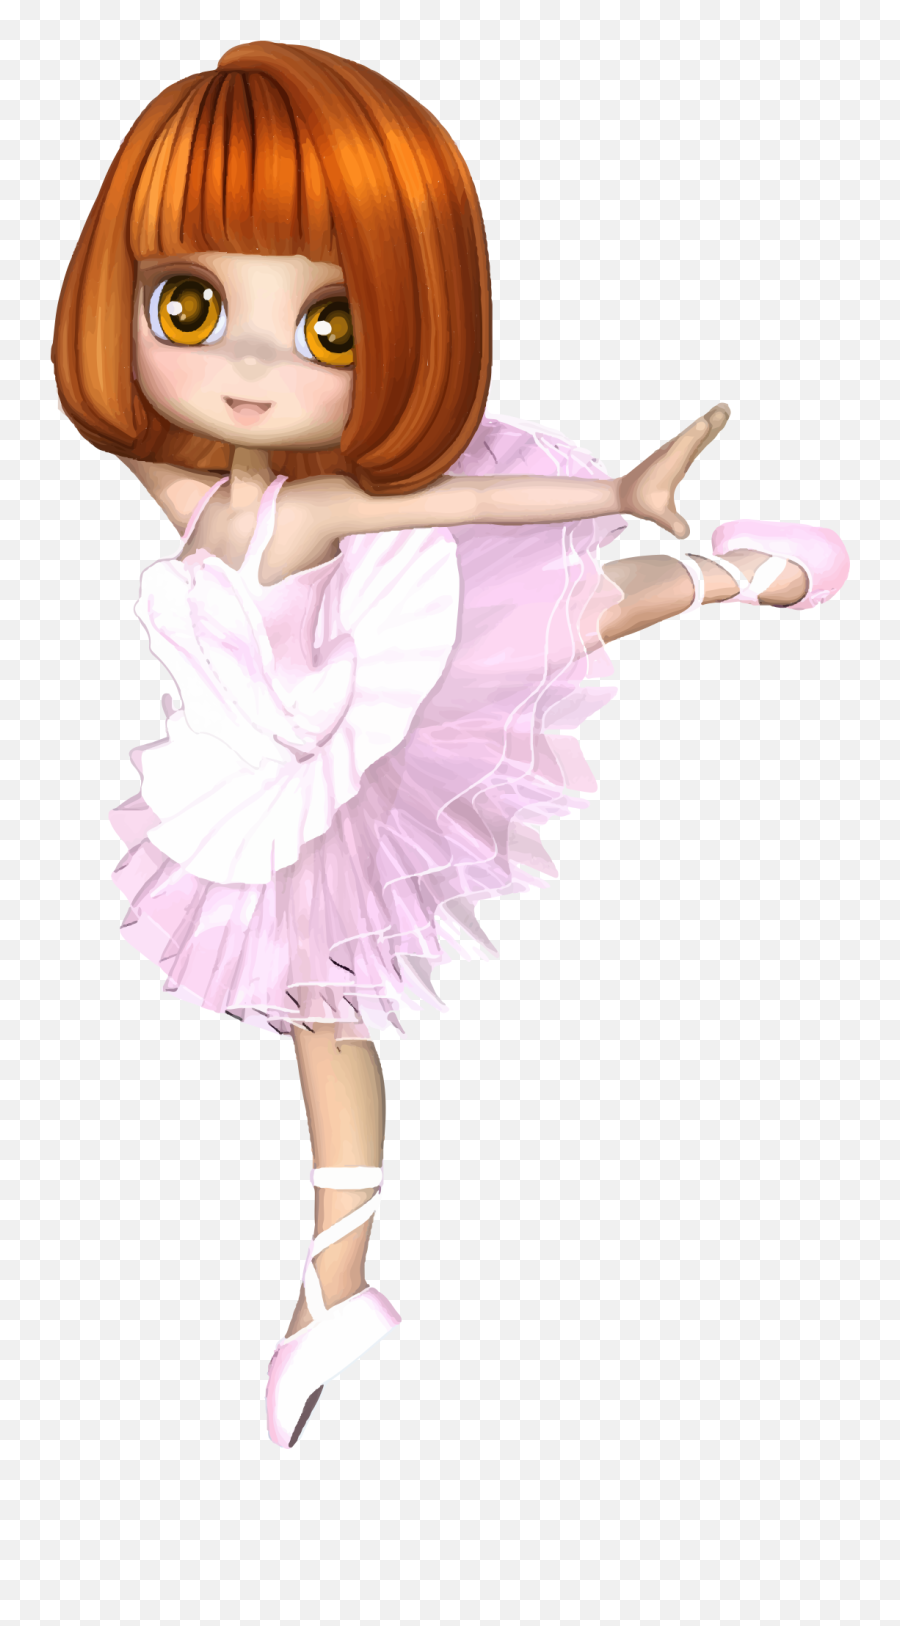 Download Dancing Anime Girl Png Image For Free - Anime Girl Png Transparent,Transparent Dancer